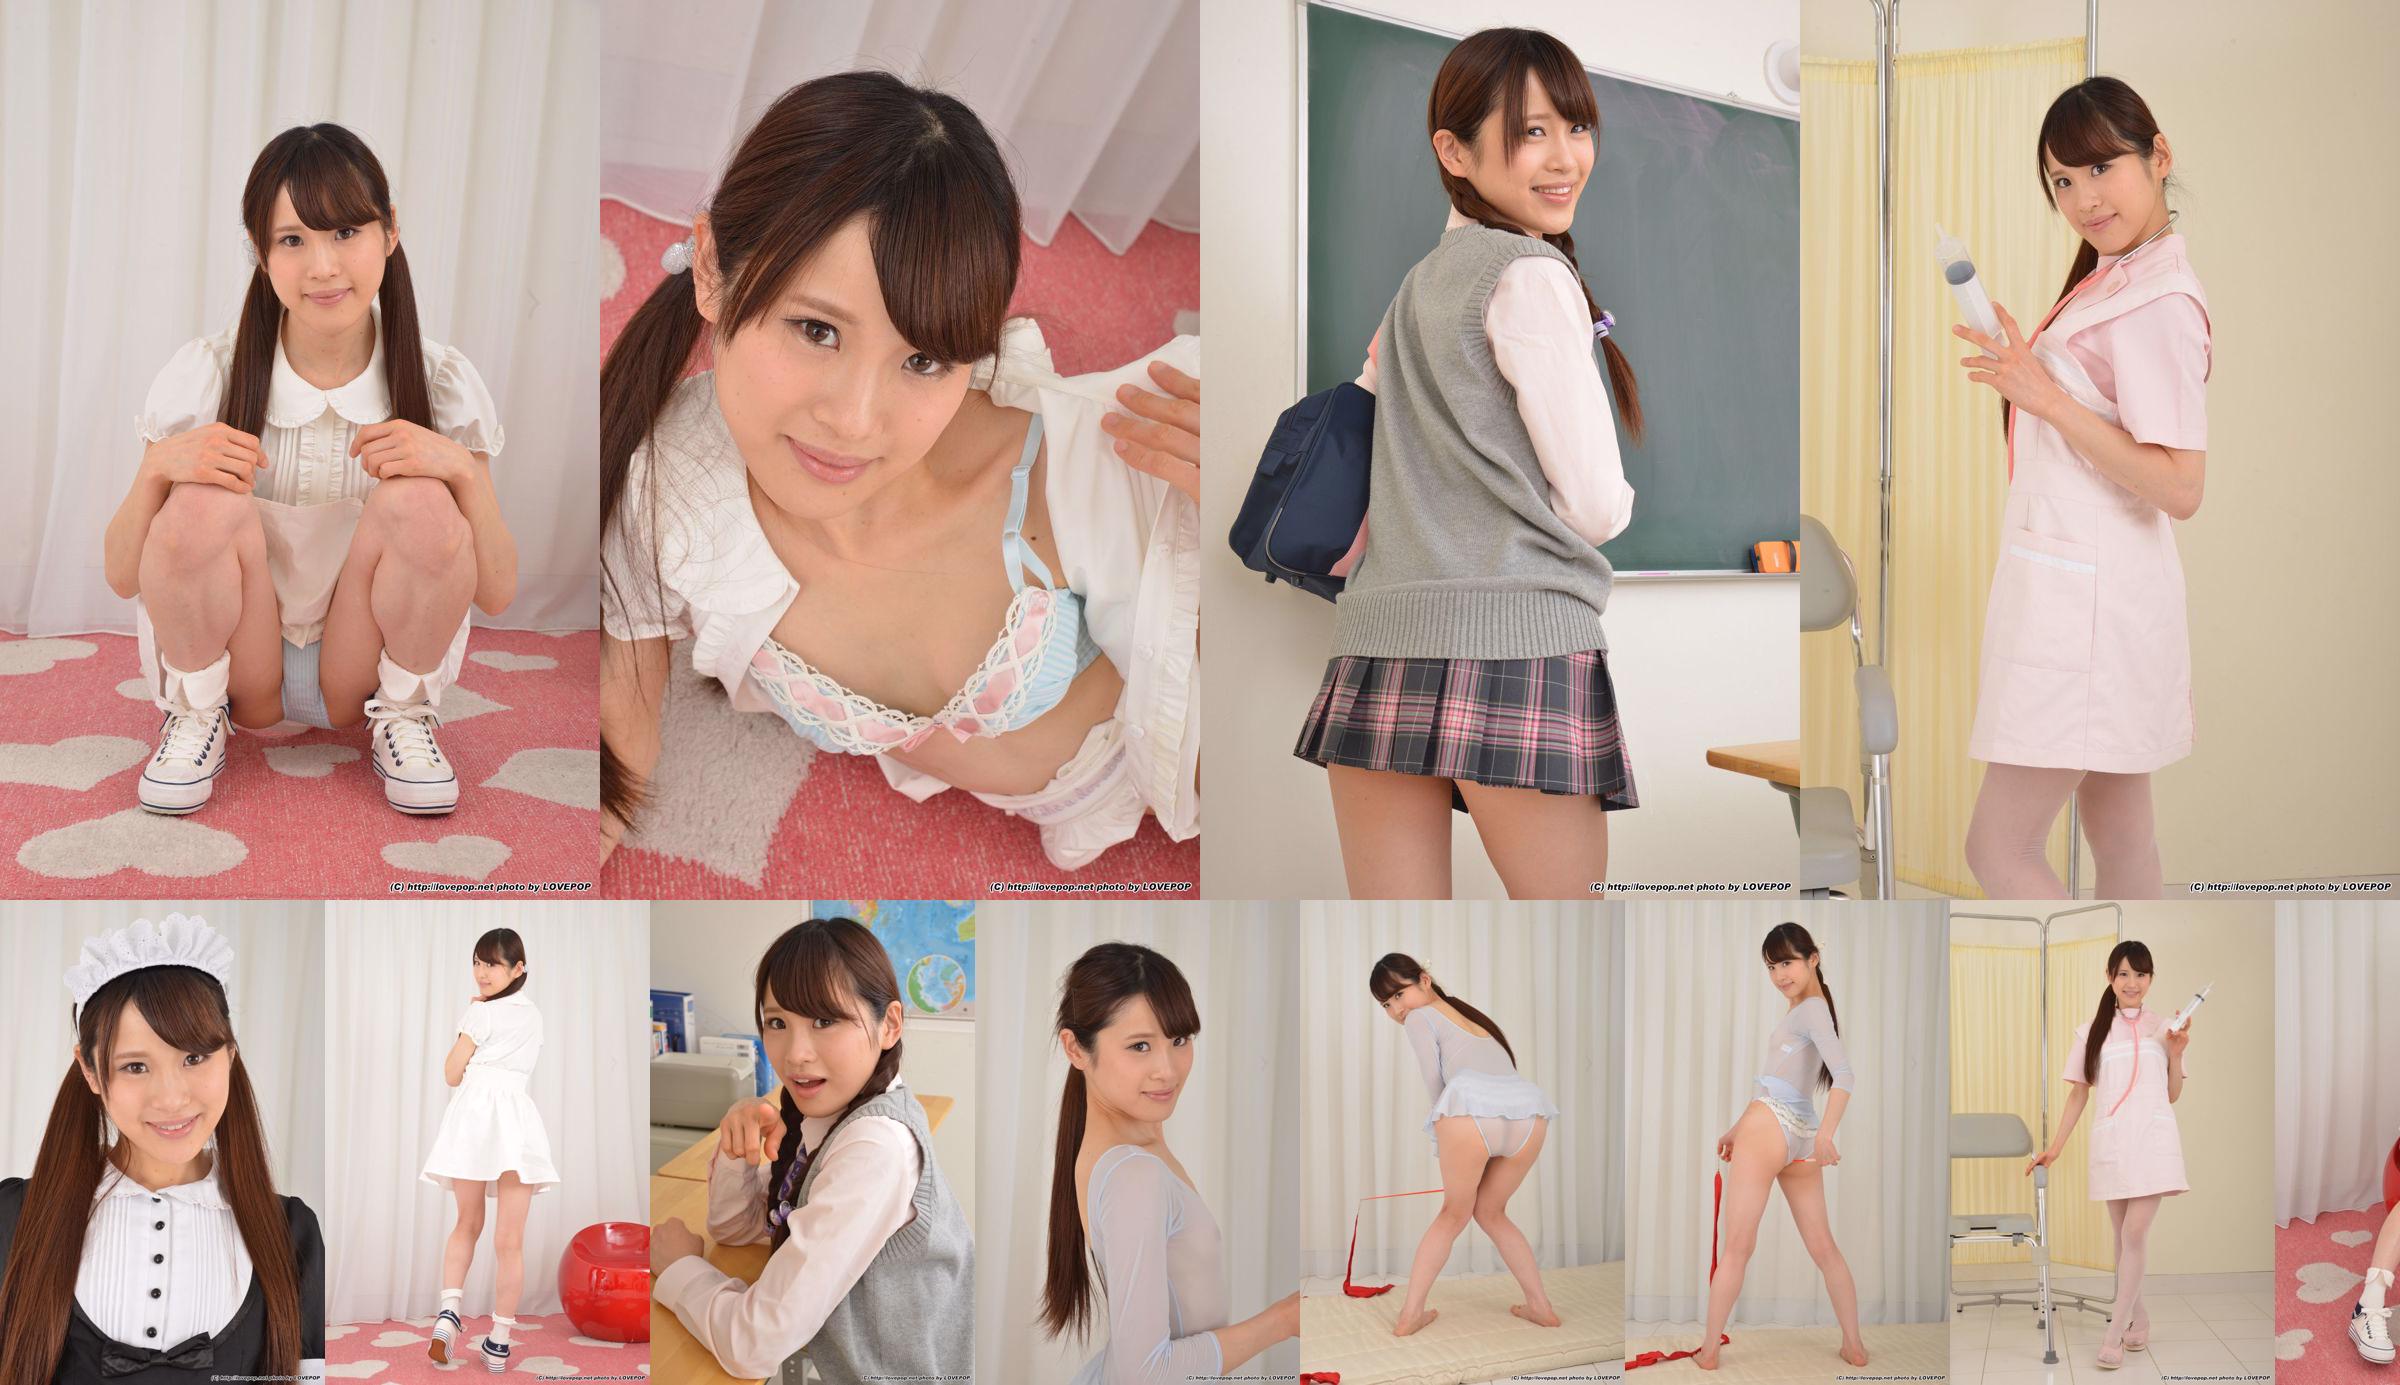 [LovePop] Chihiro Yuikawa „Perspective Gym Suit” No.742a5f Strona 20